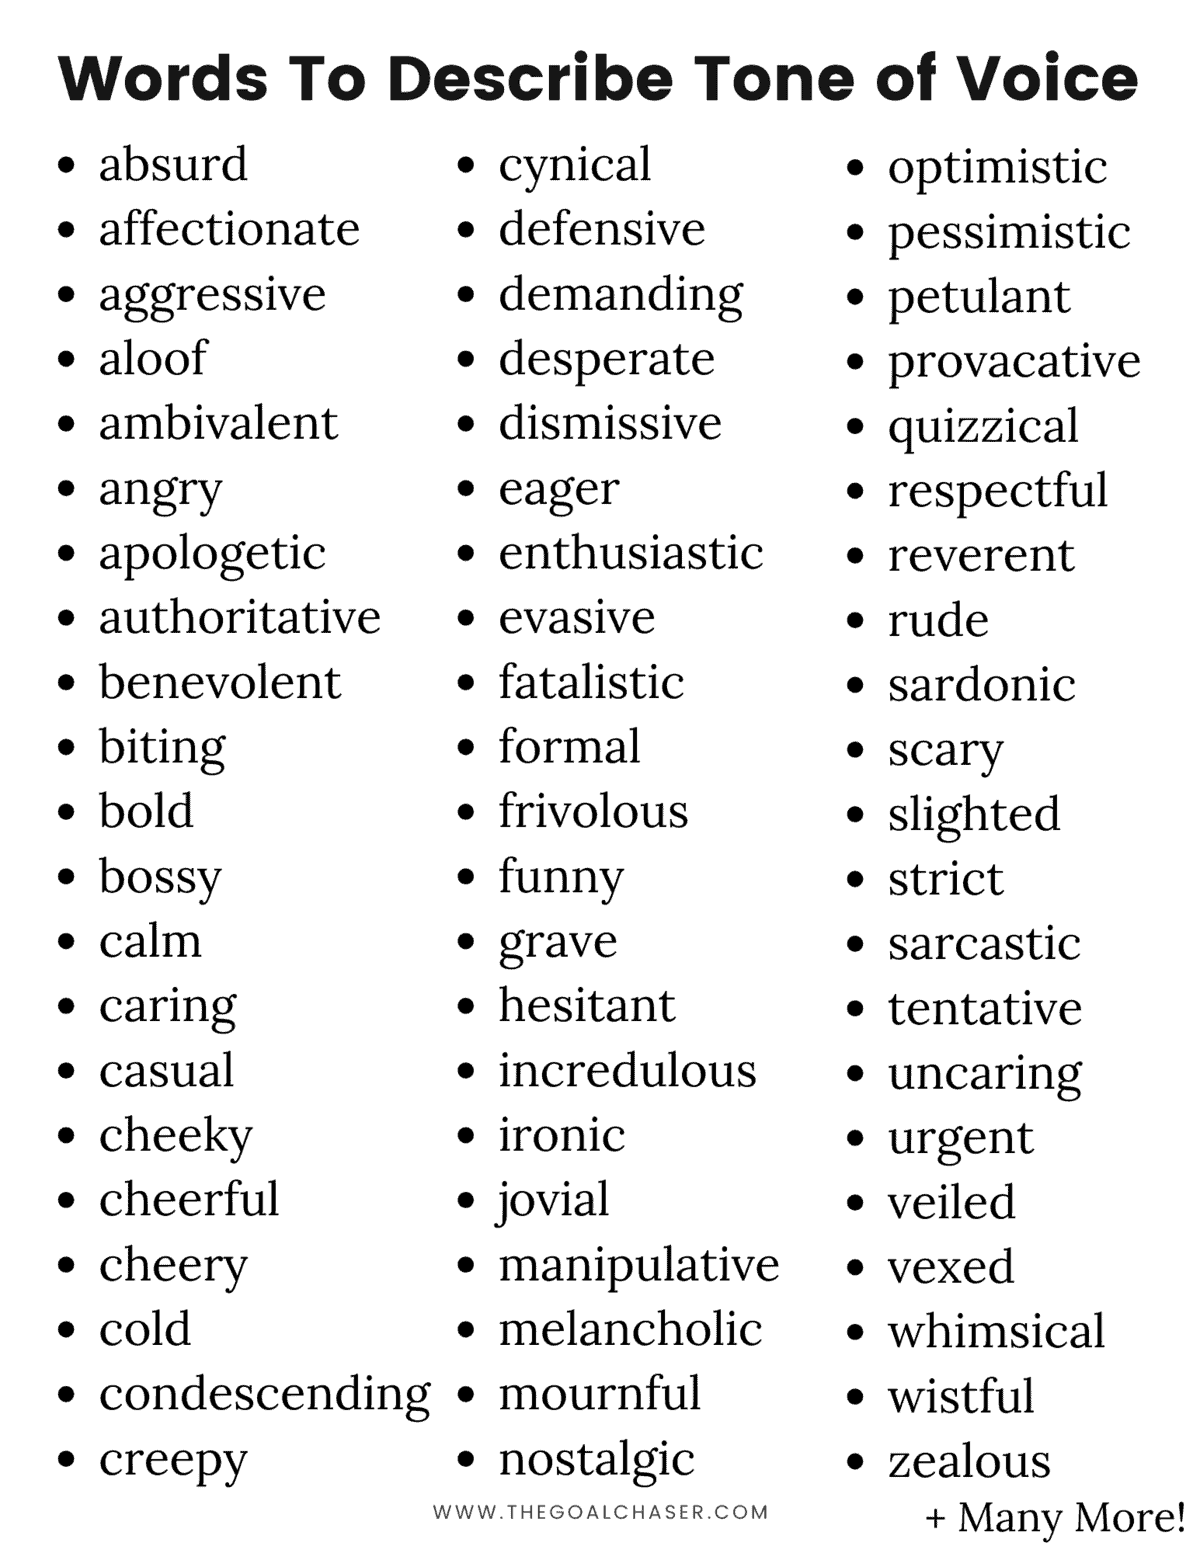 60+ Words To Describe Tone Of Voice (With Meanings)